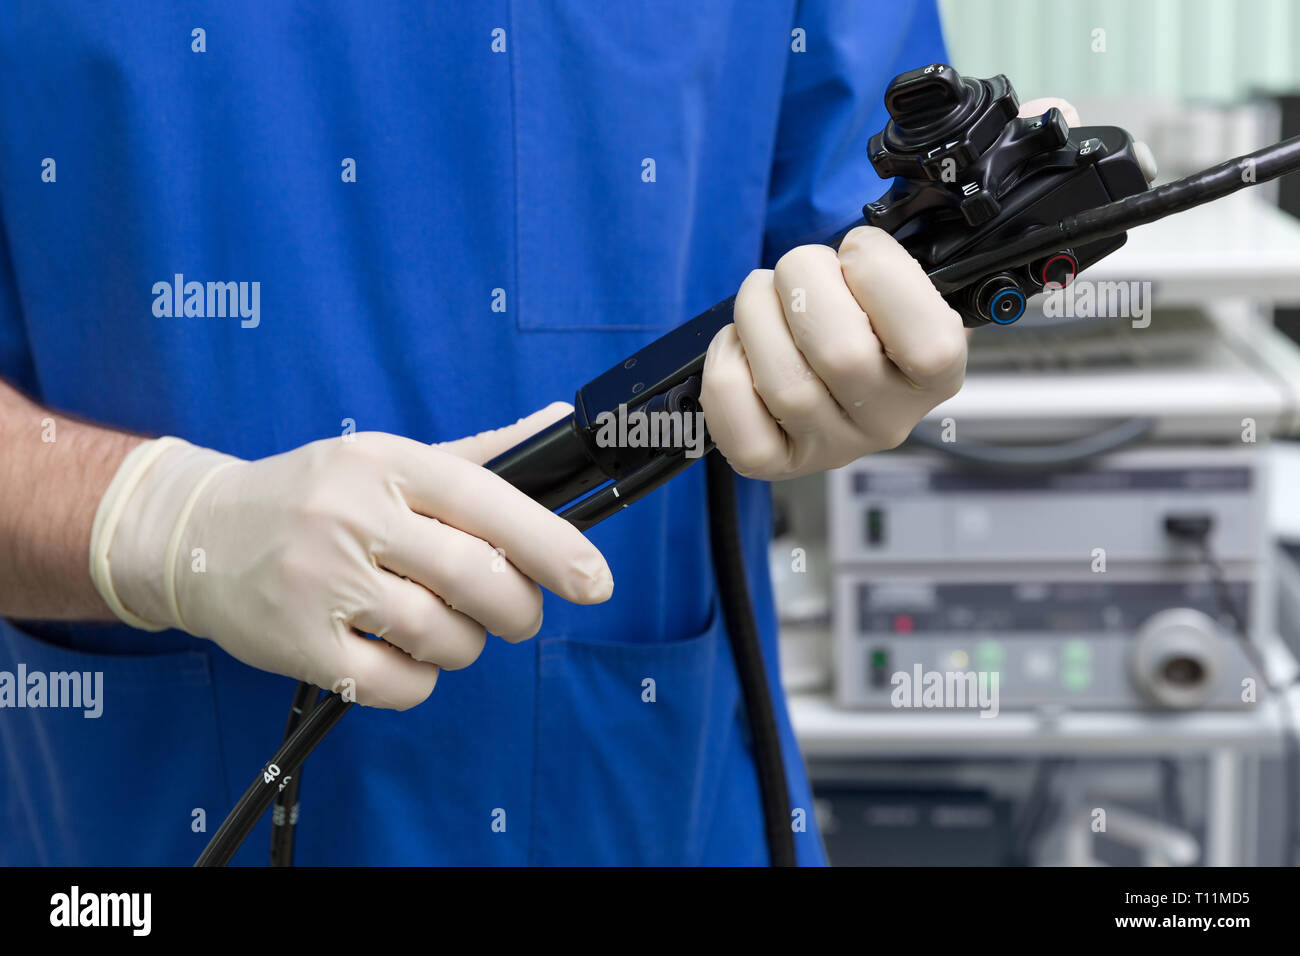 endoscope is in the hands of the doctor Stock Photo